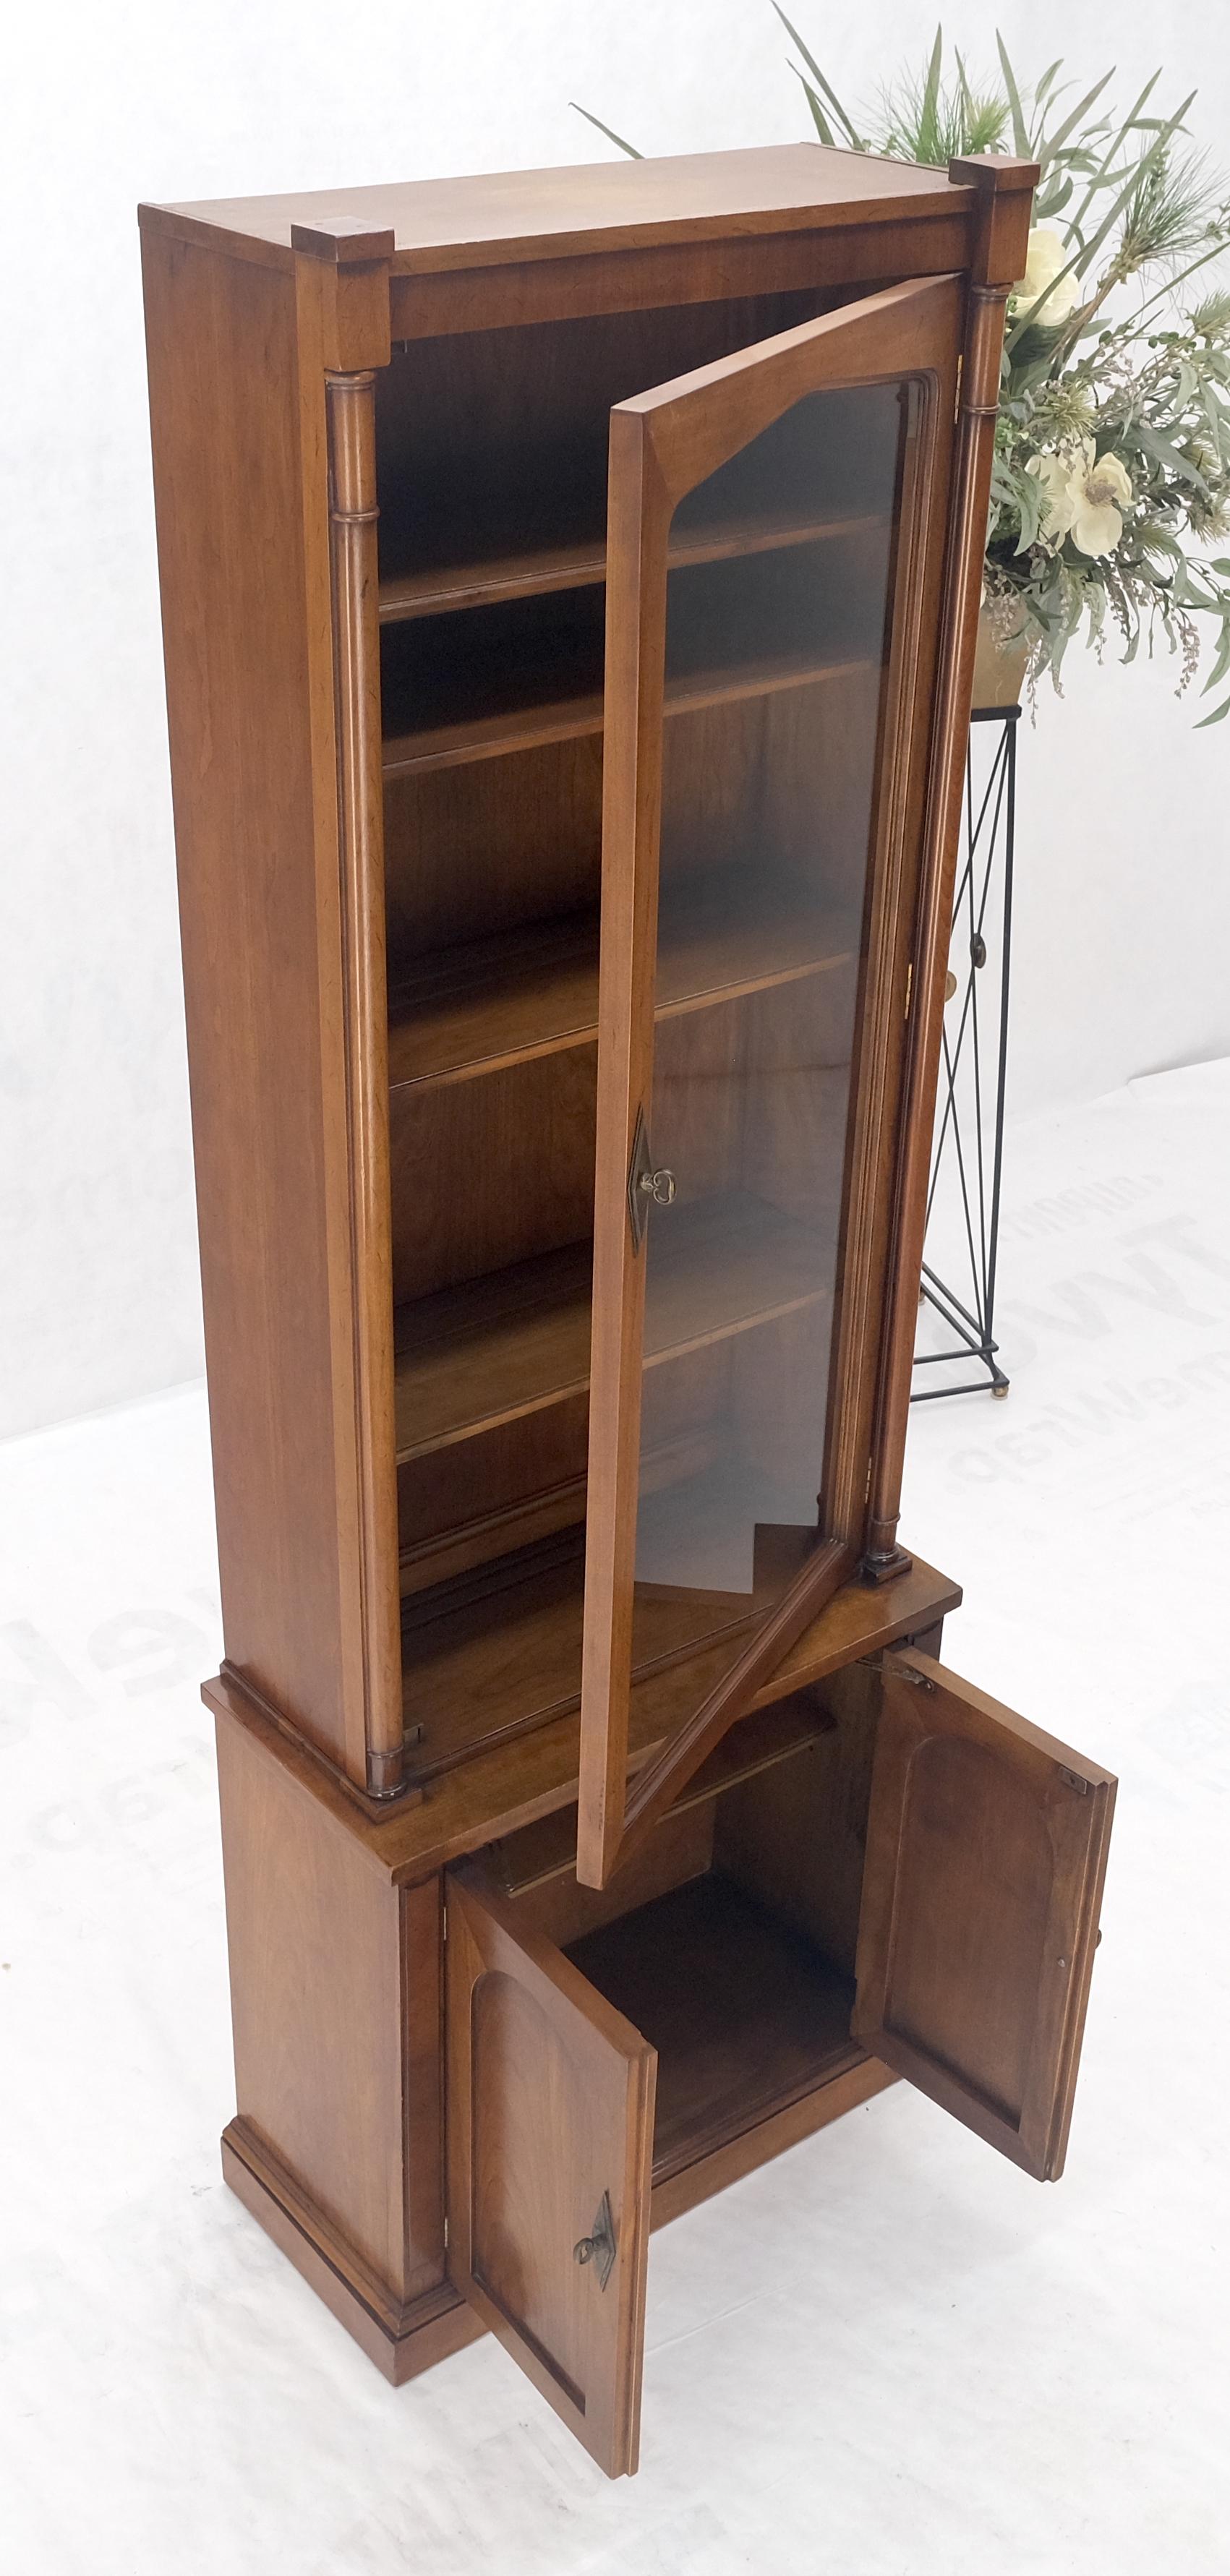 Single Glass Door Solid Cherry Tall Bookcase Cupboard Vitrine Display Case Bottom Compartment MINT!